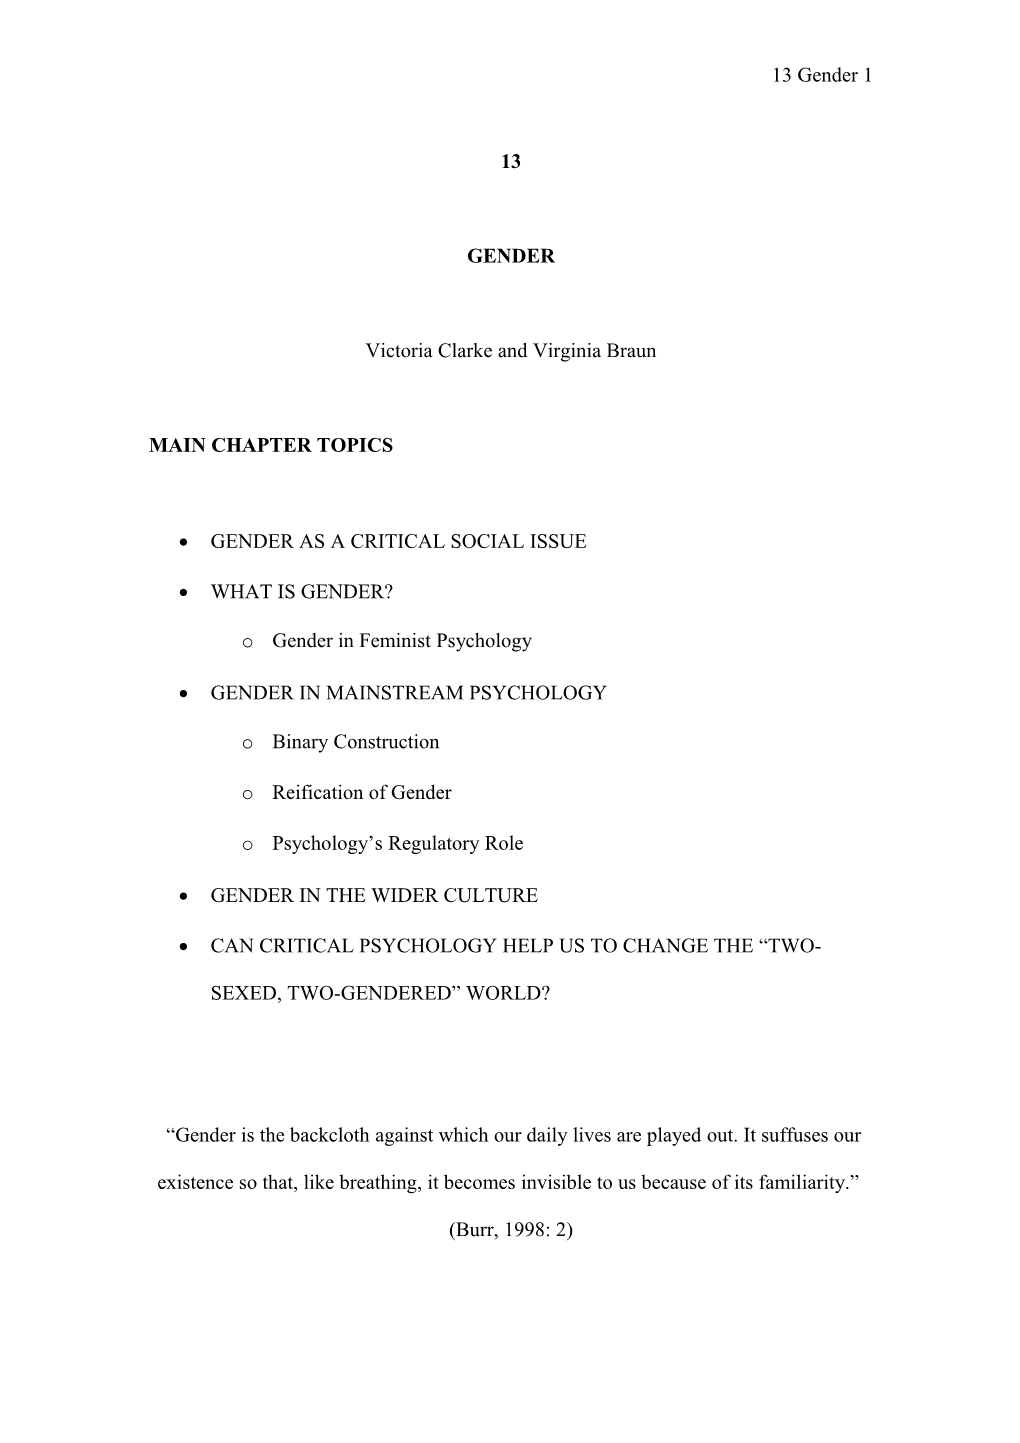 Possible Outline for a Critical Psychology Book Chapter on Sex, Gender and Sexuality